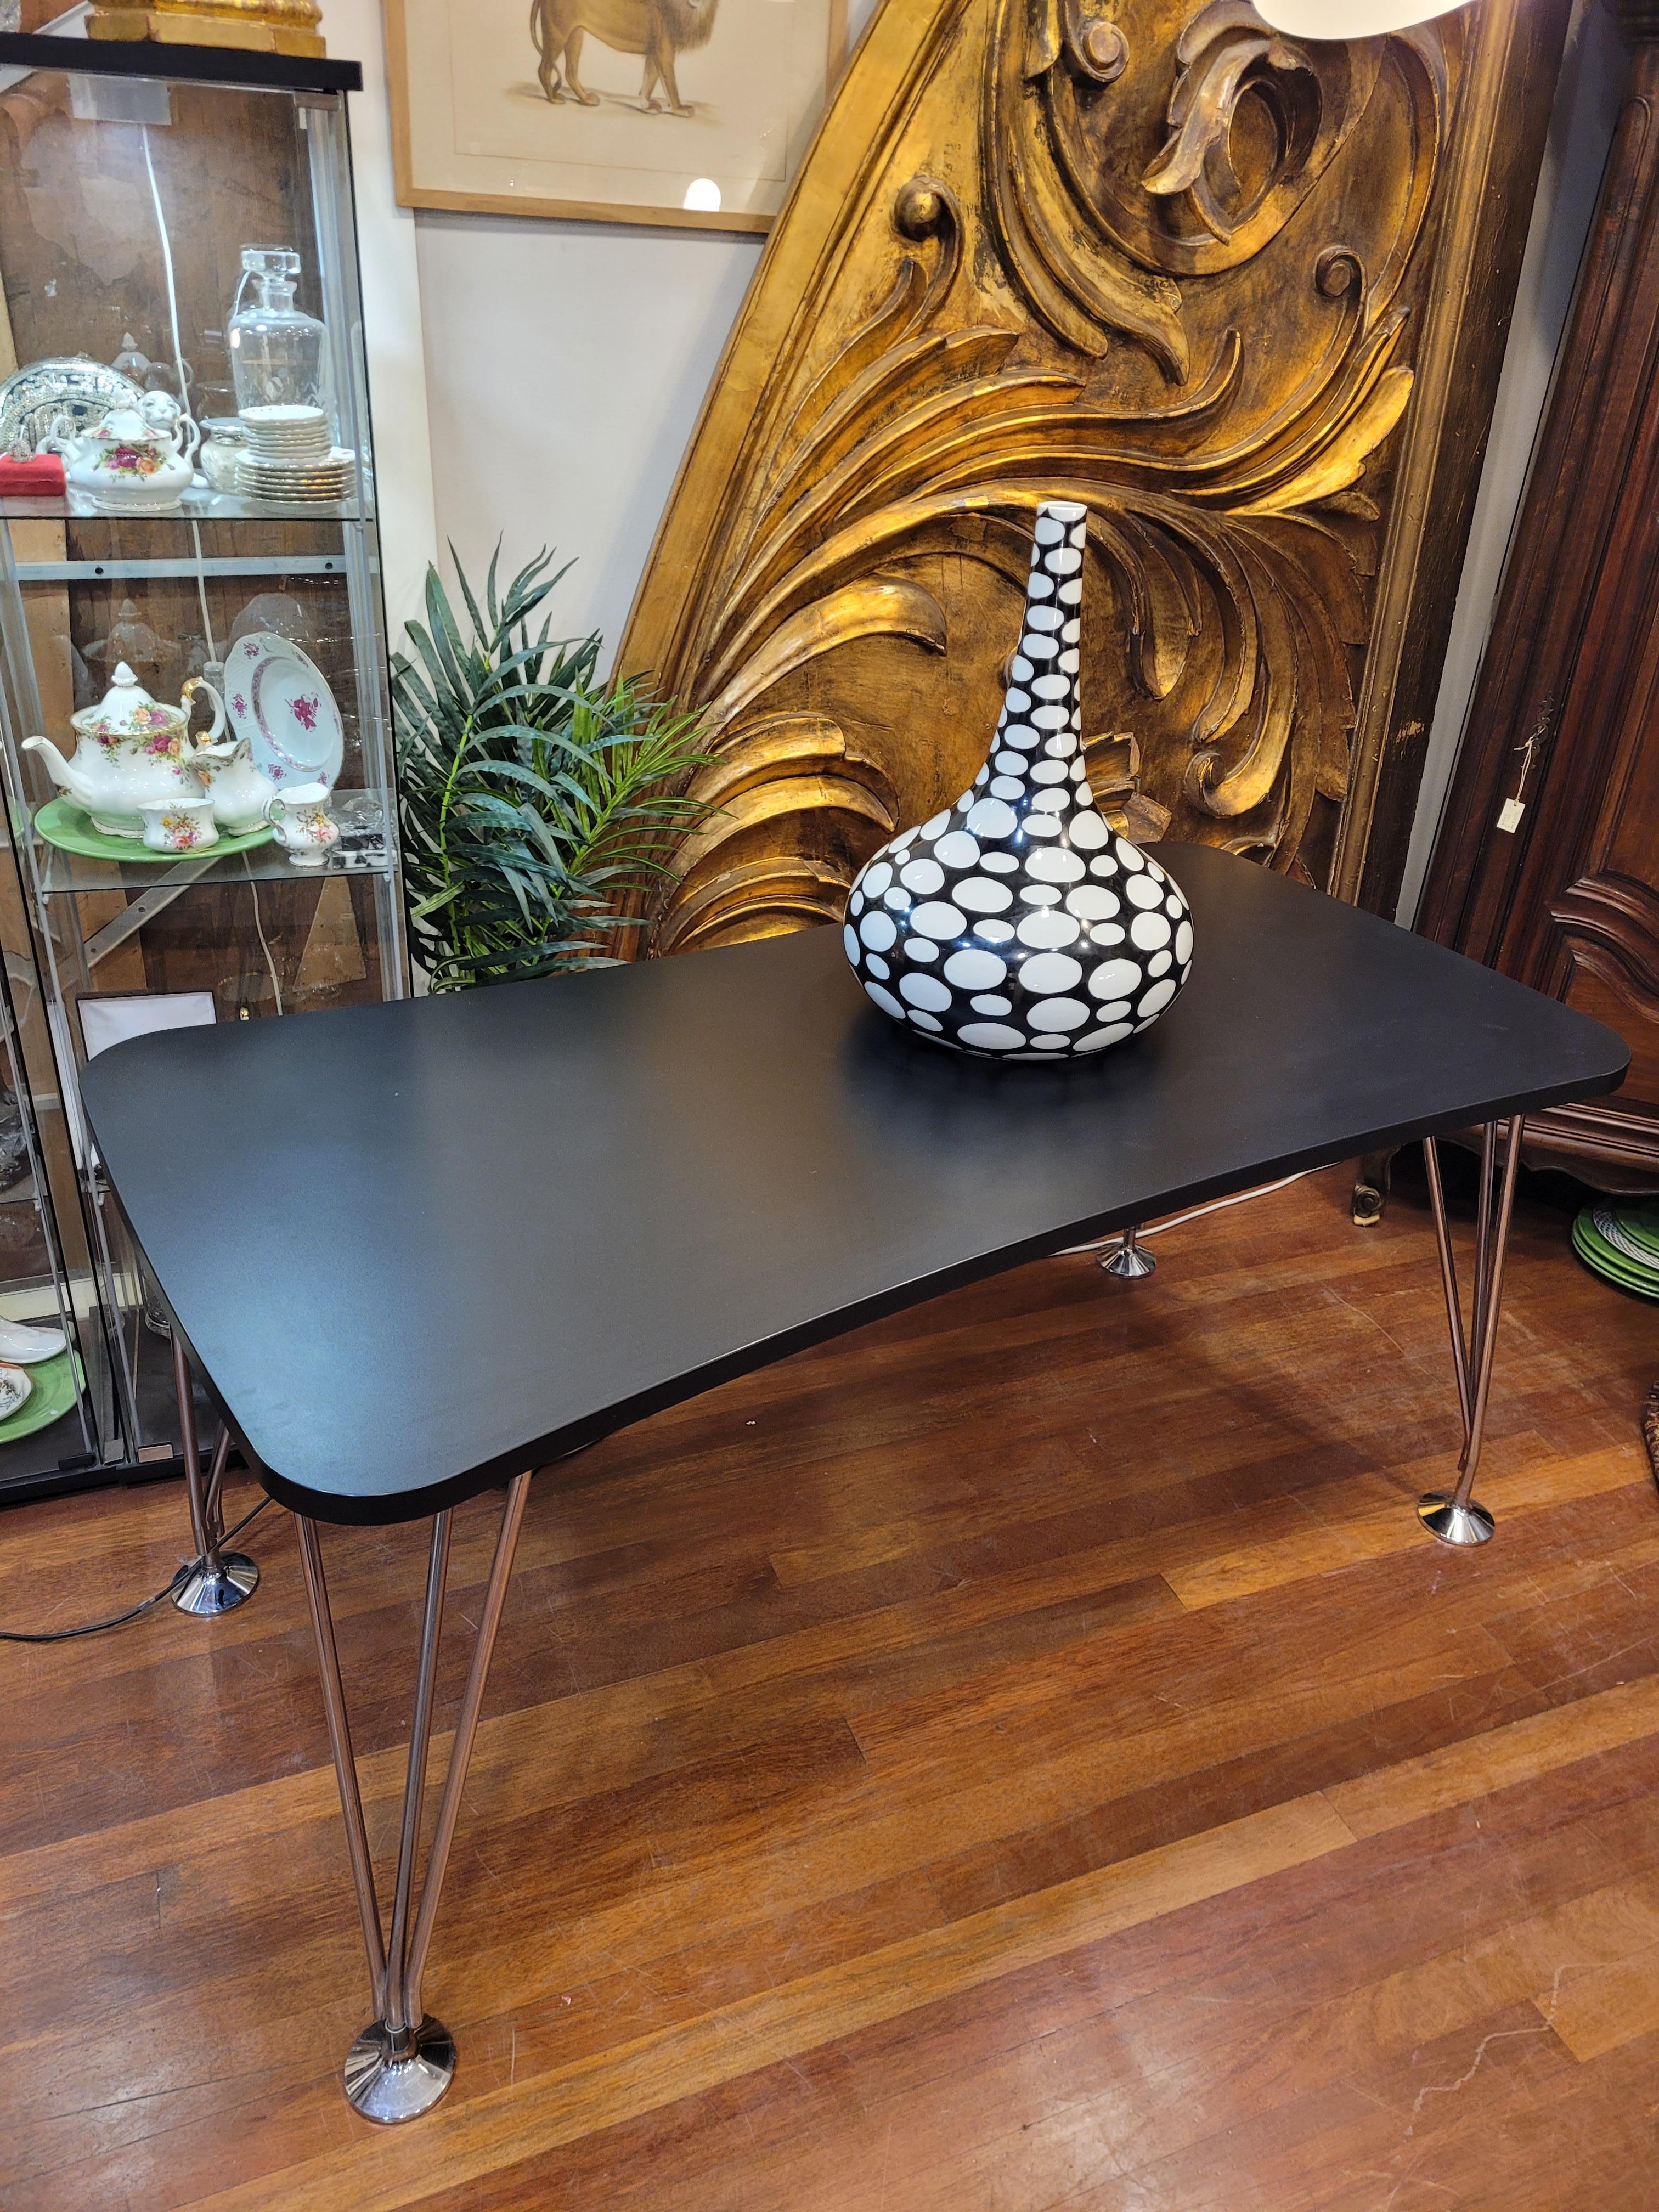 Amazing and fashionable table designed by Piet Hein & Bruno Mathsson for the house of Frits Hansen, made in the 1960s in Denmark. The top is made of black lacquered wood, and chromed steel legs. Extremely simple and pure, this table is one of the